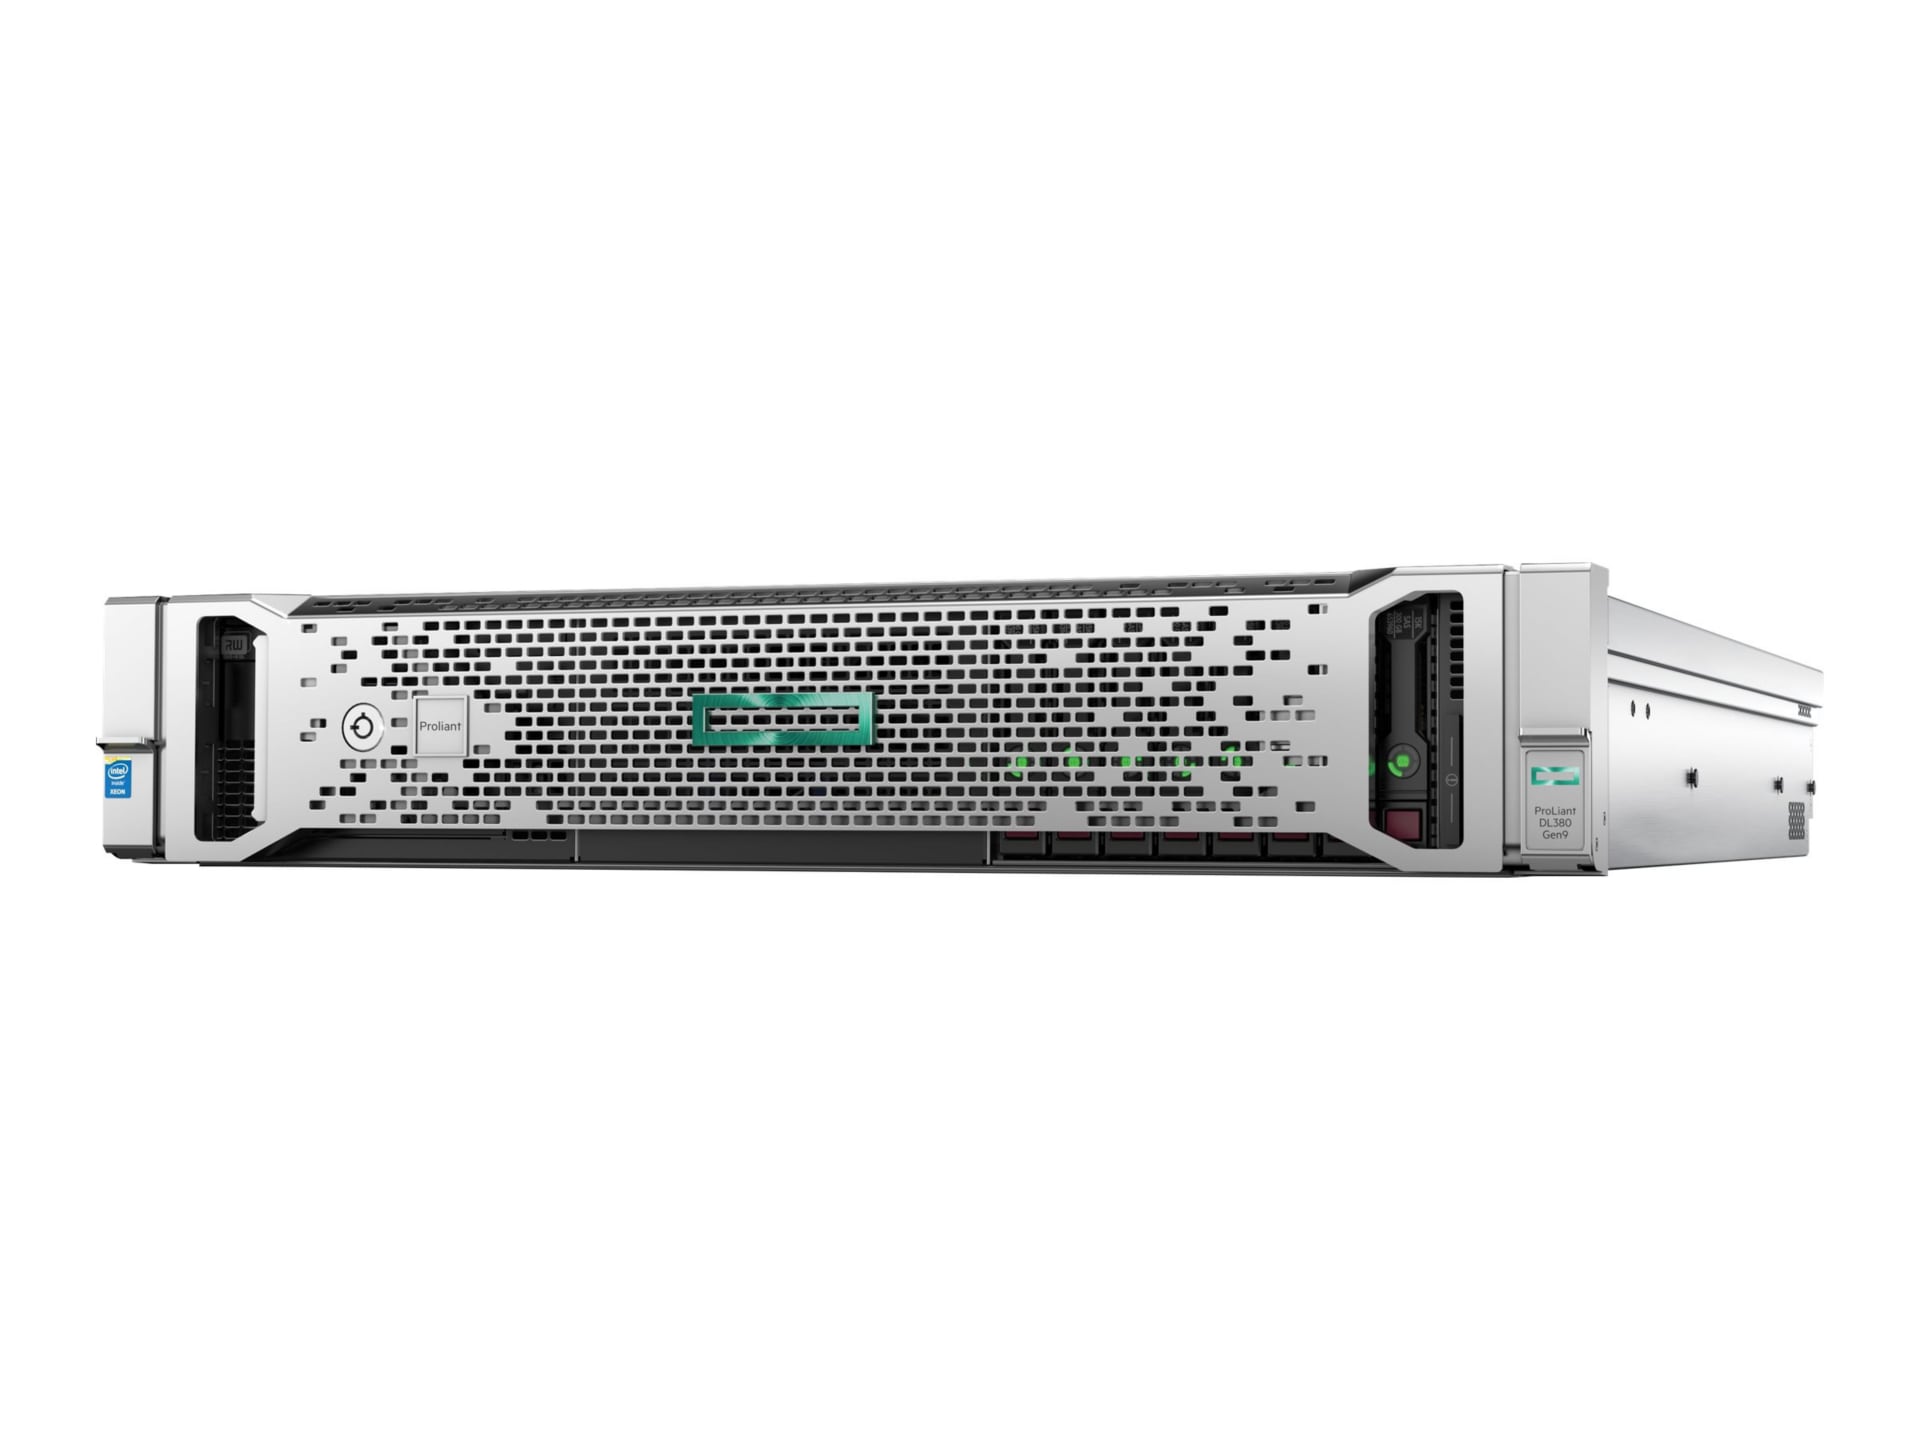 HPE ProLiant DL380 Gen9 - Special pricing while supplies last